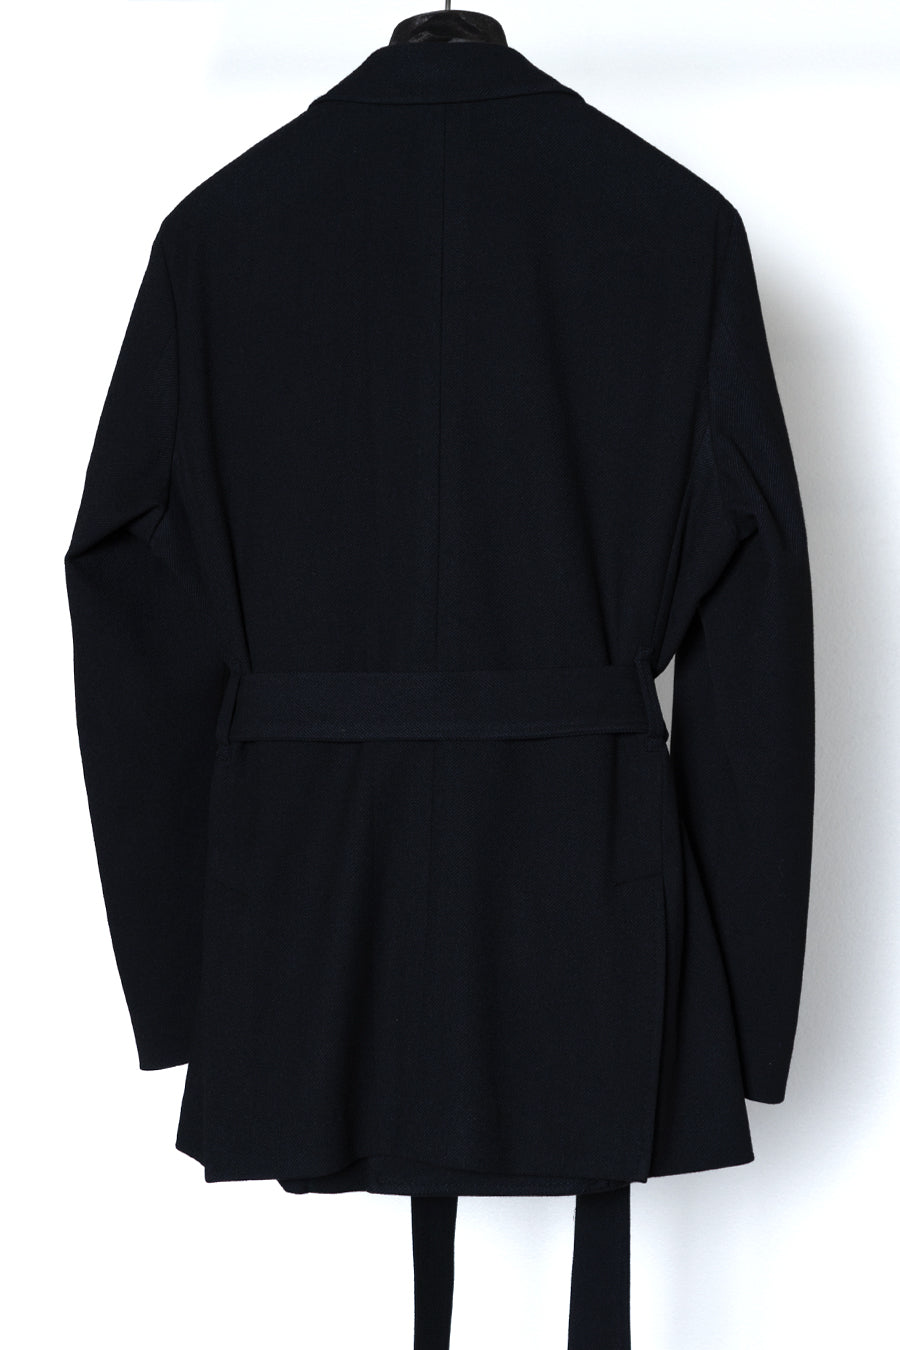 FRENCH TWILL BELTED JACKET / BLACK - RAINMAKER KYOTO